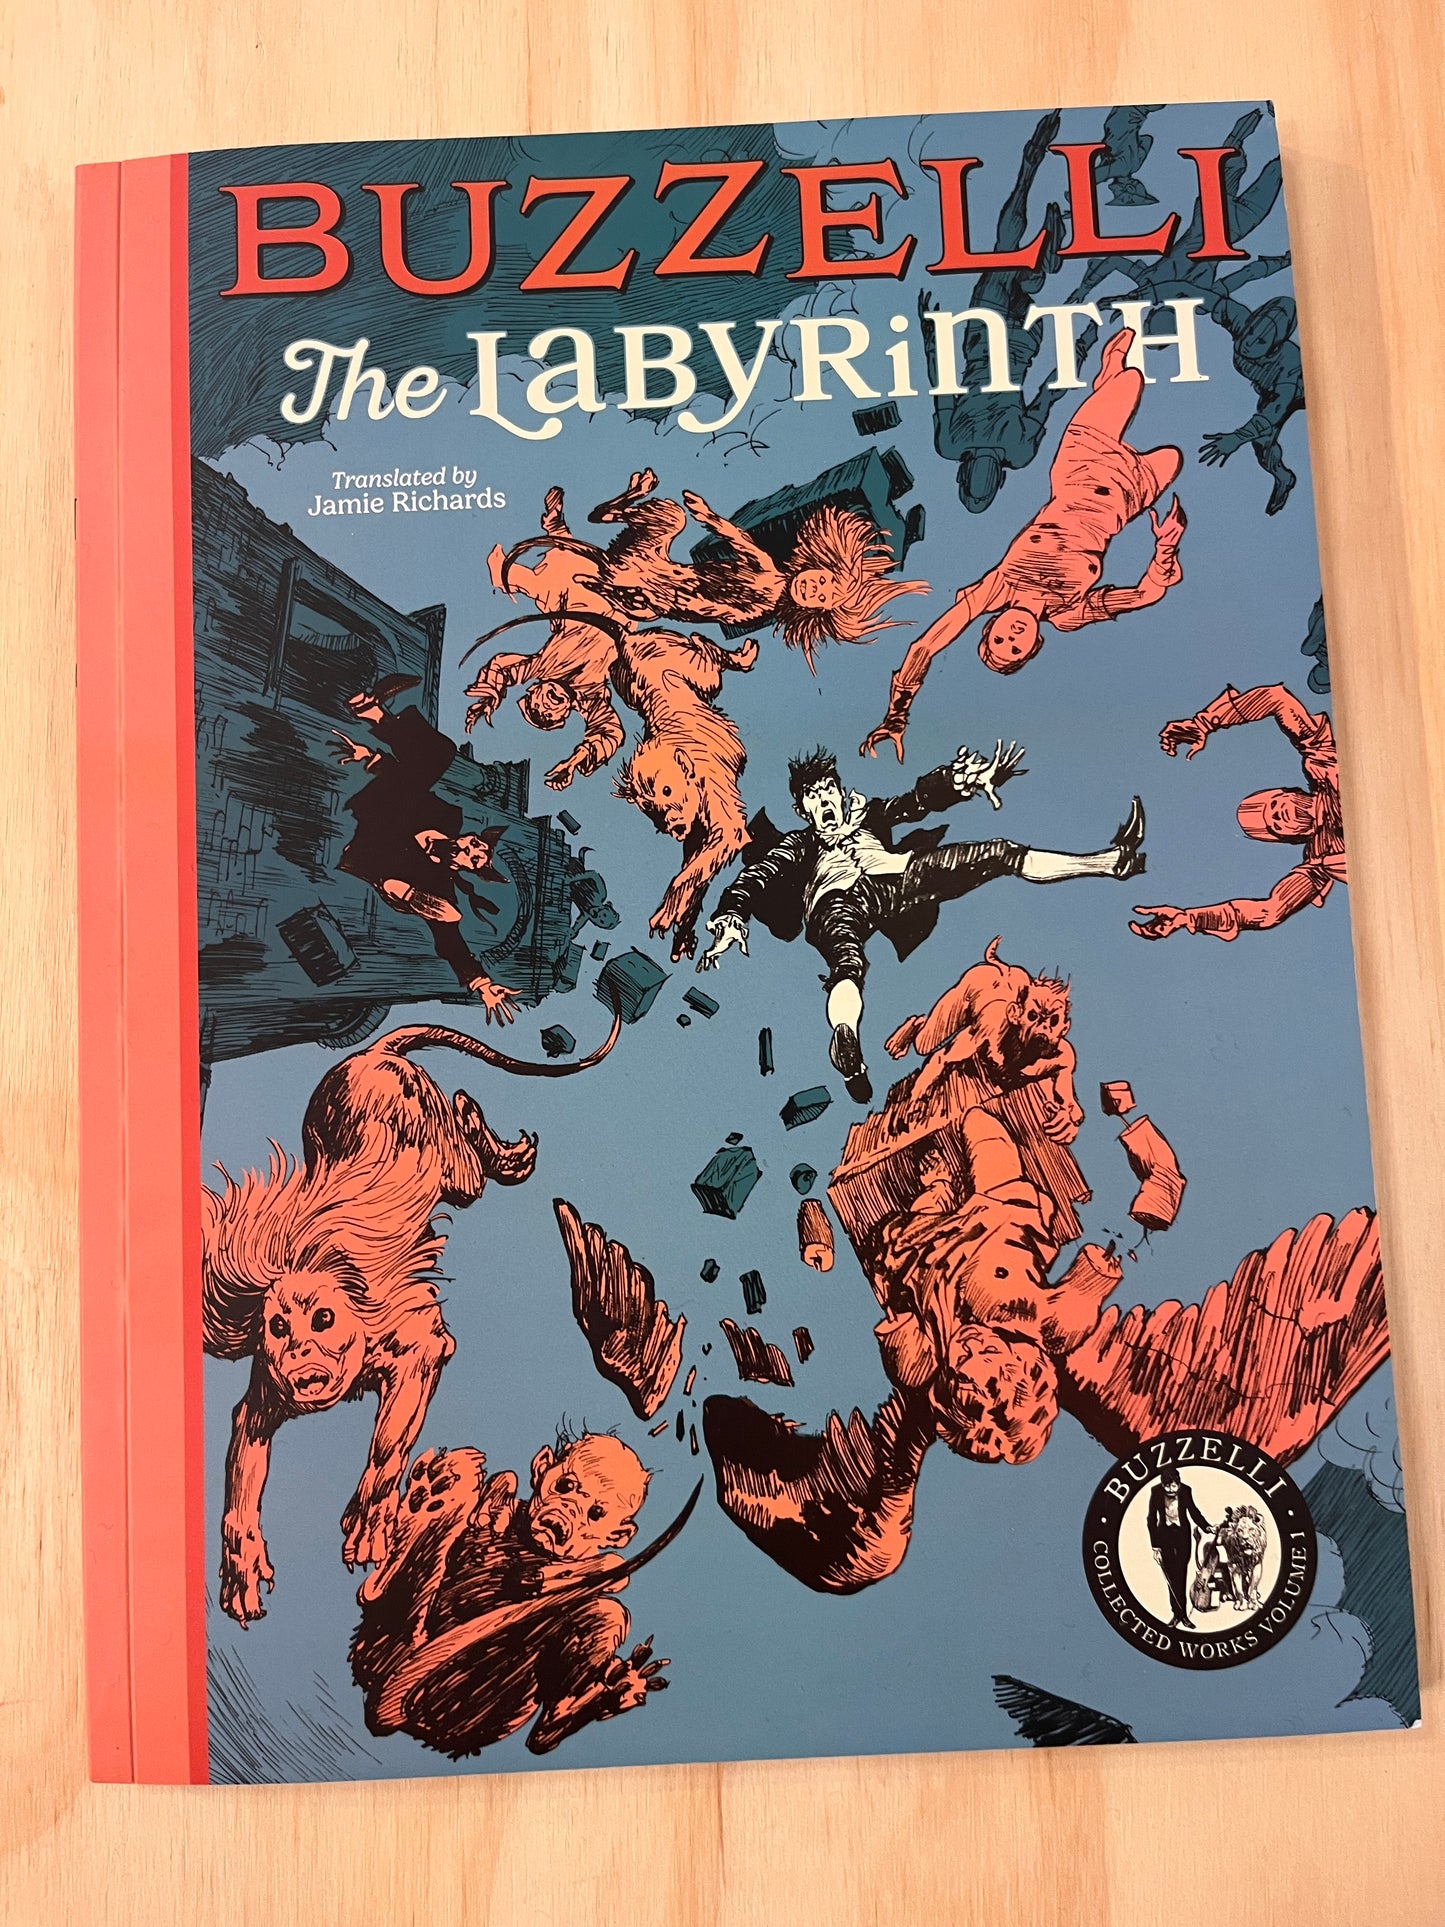 Buzzelli Collected Works Vol. 1: The Labyrinth by Guido Buzzelli